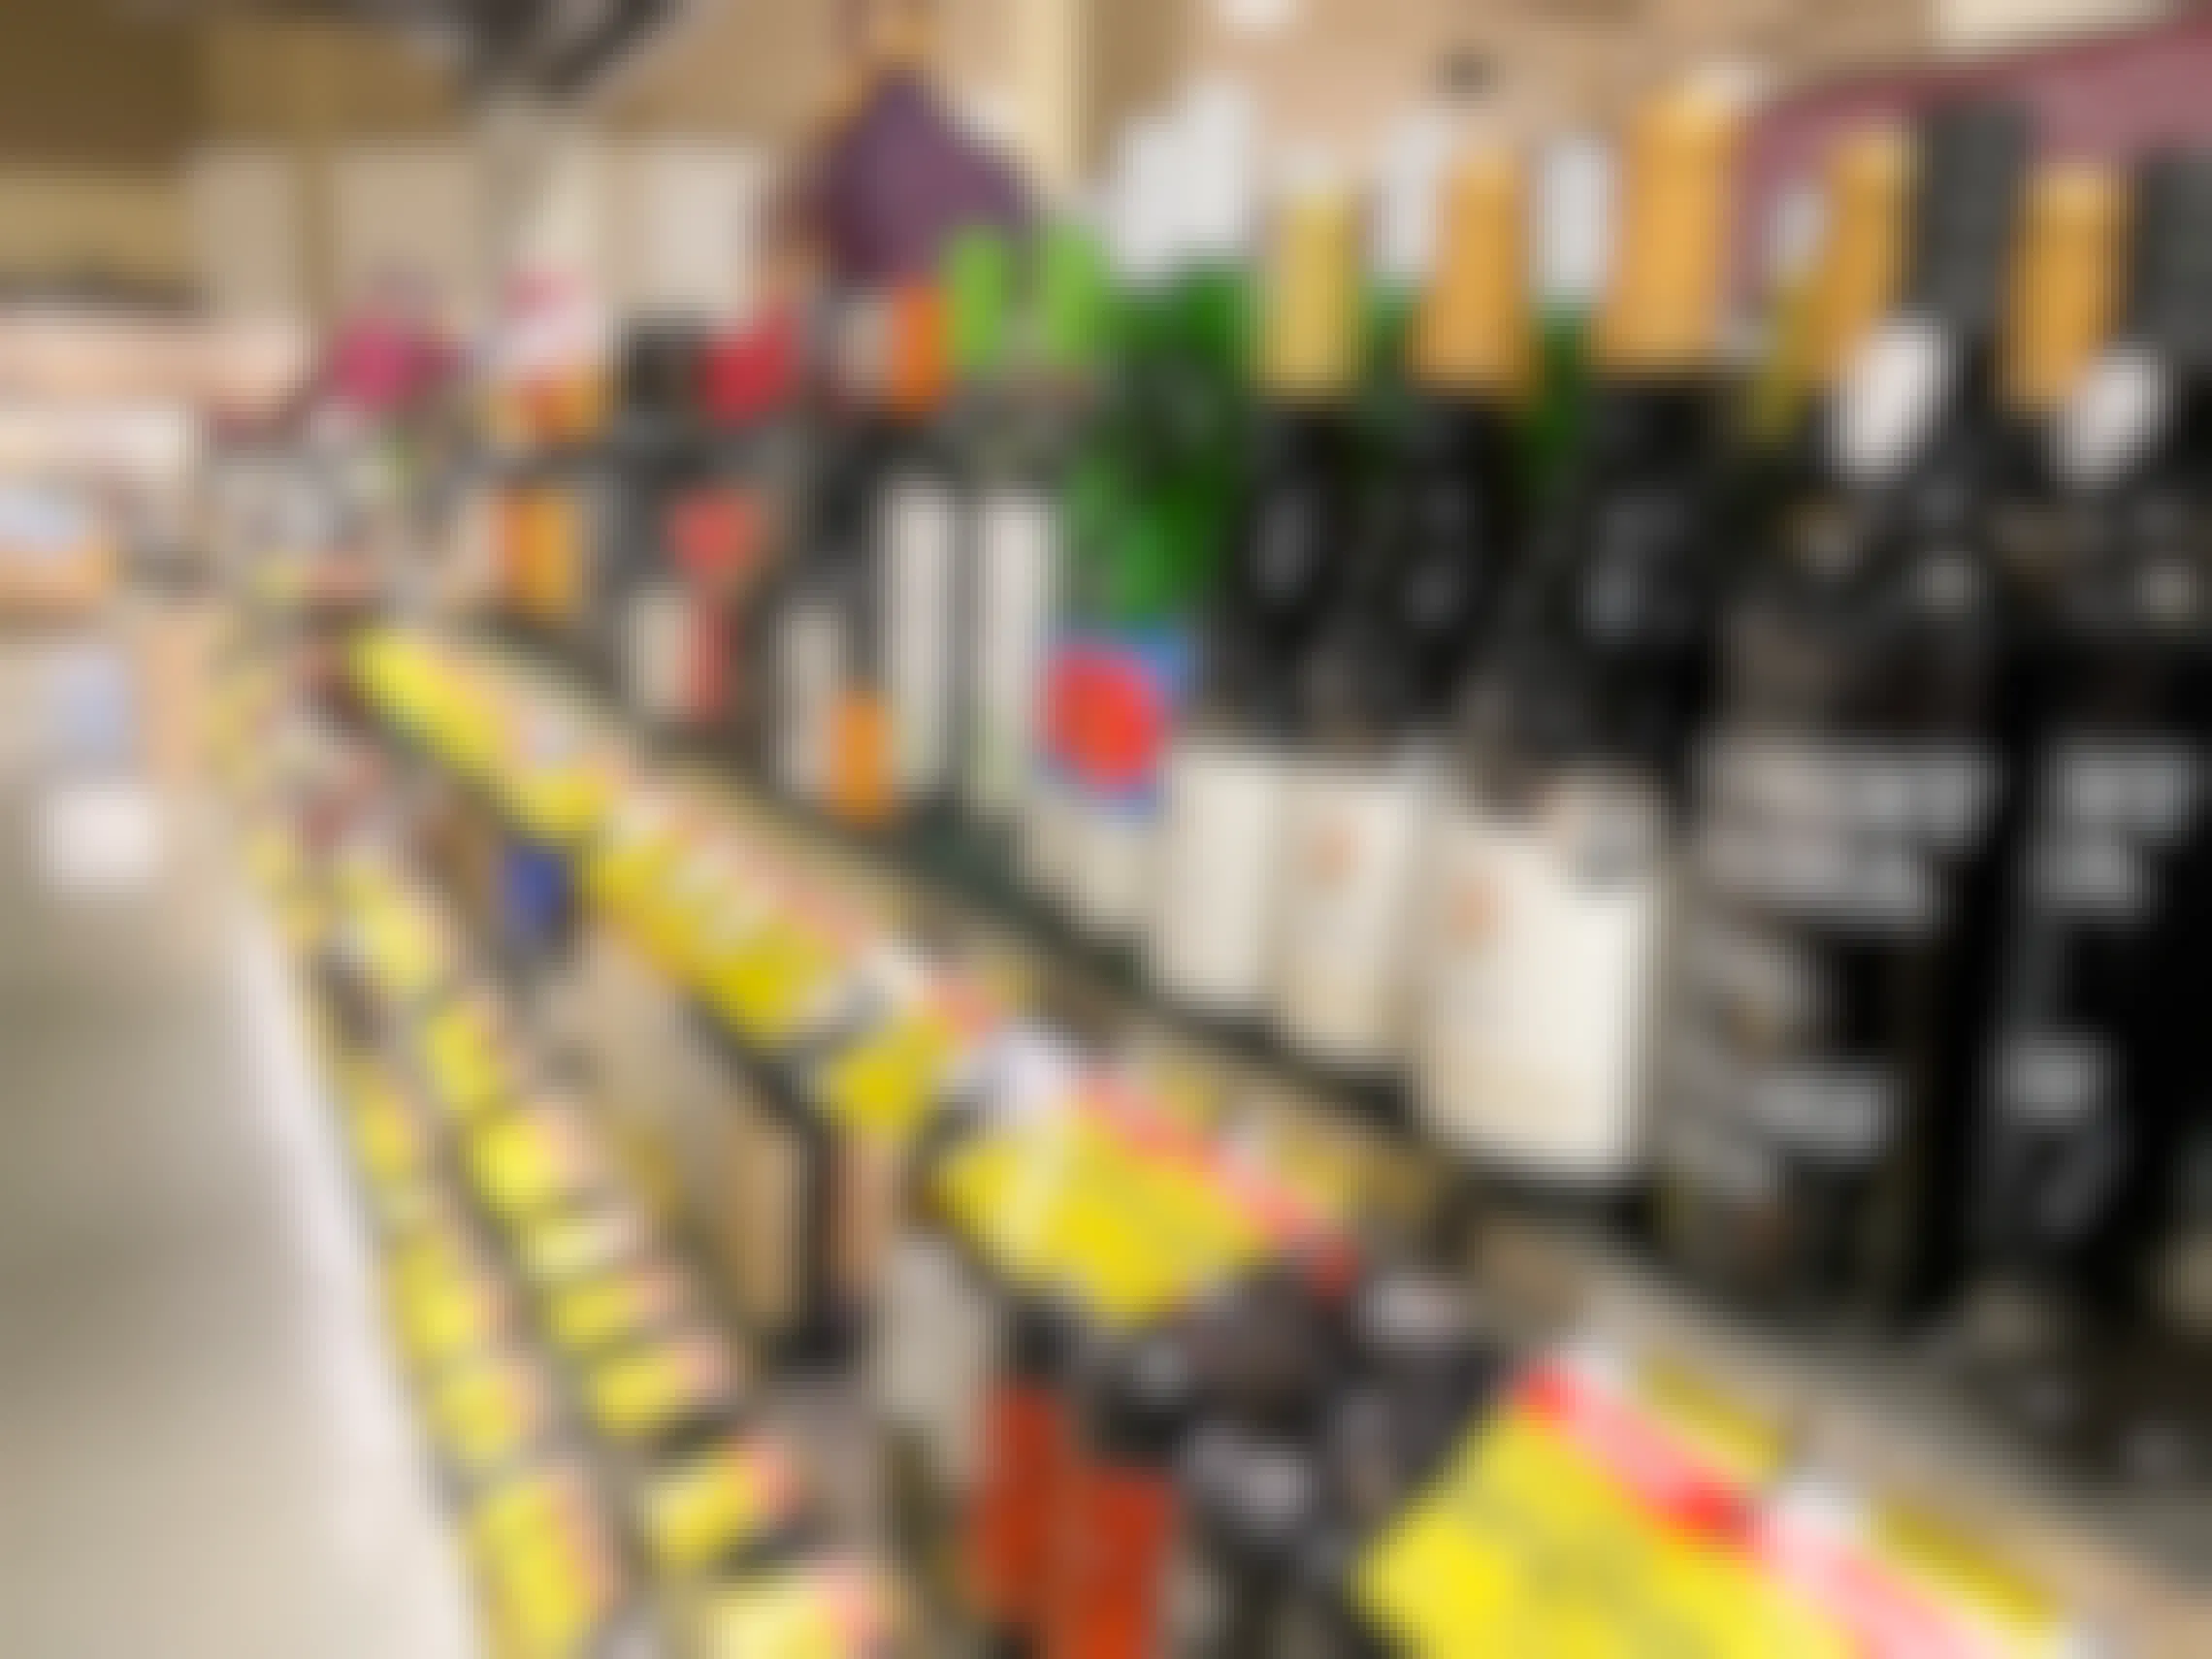 A grocery store aisle filled with wine